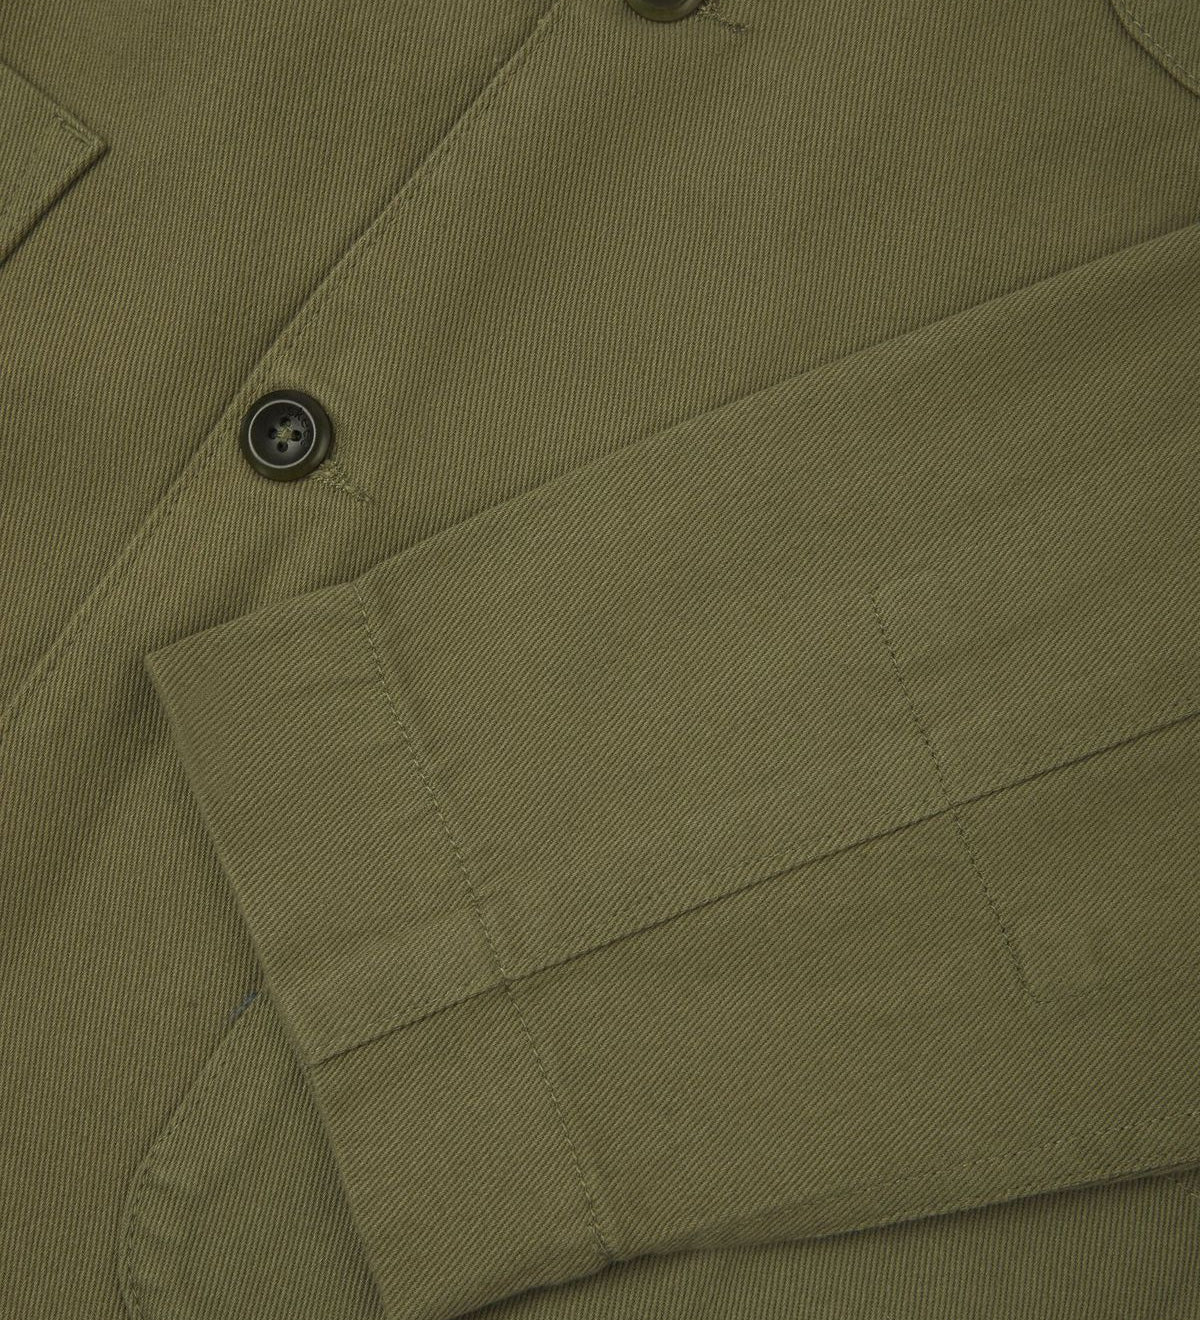 Close-up view of sleeve and buttons -  moss-green organic cotton drill blazer for men